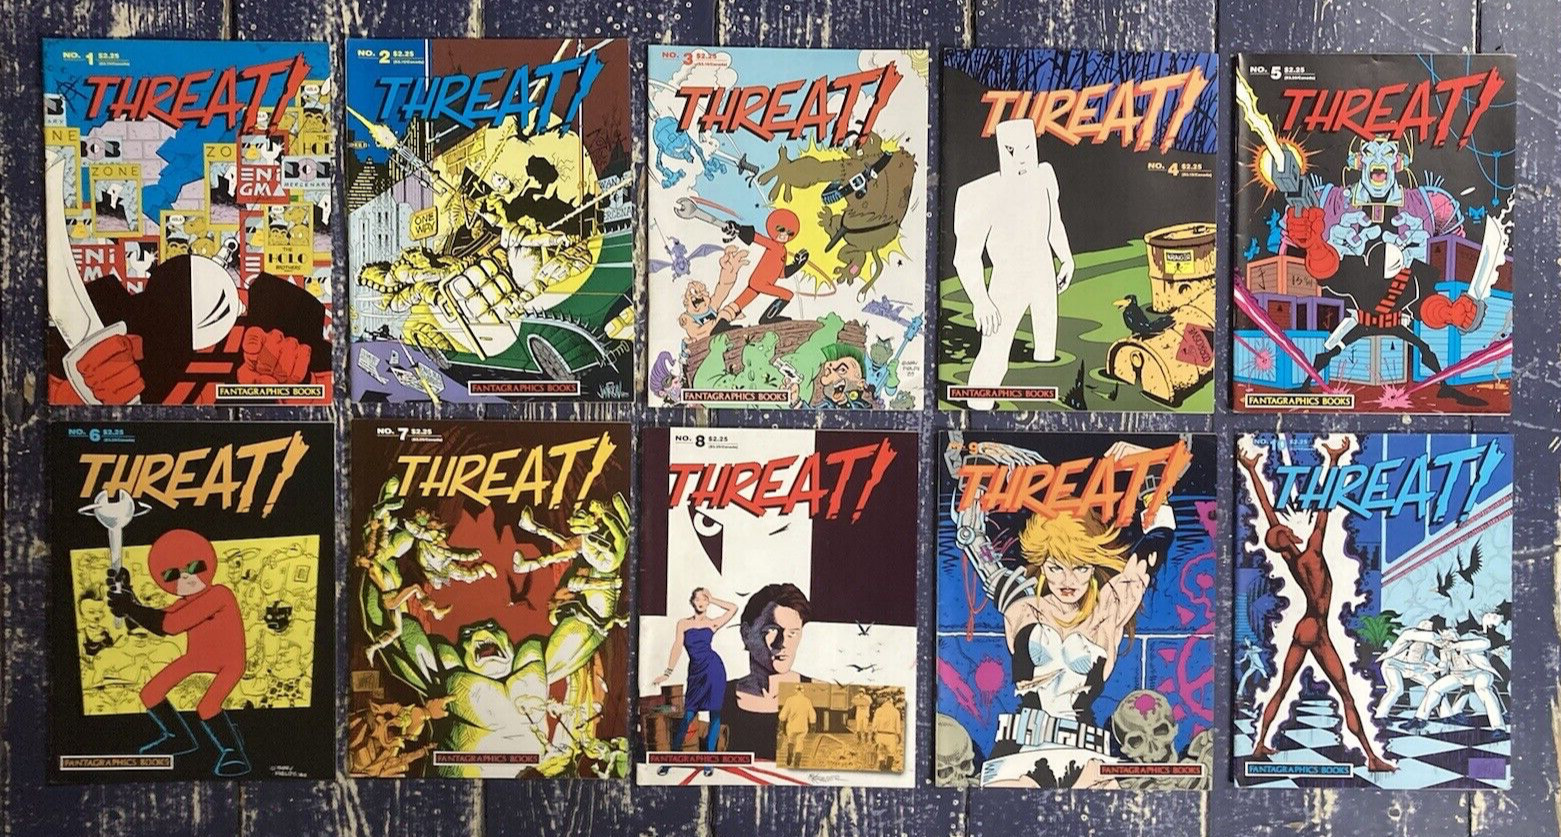 Threat Fantagraphics #1-10 Complete BW Indie Comix Anthology COMIC 1986-87 OOP